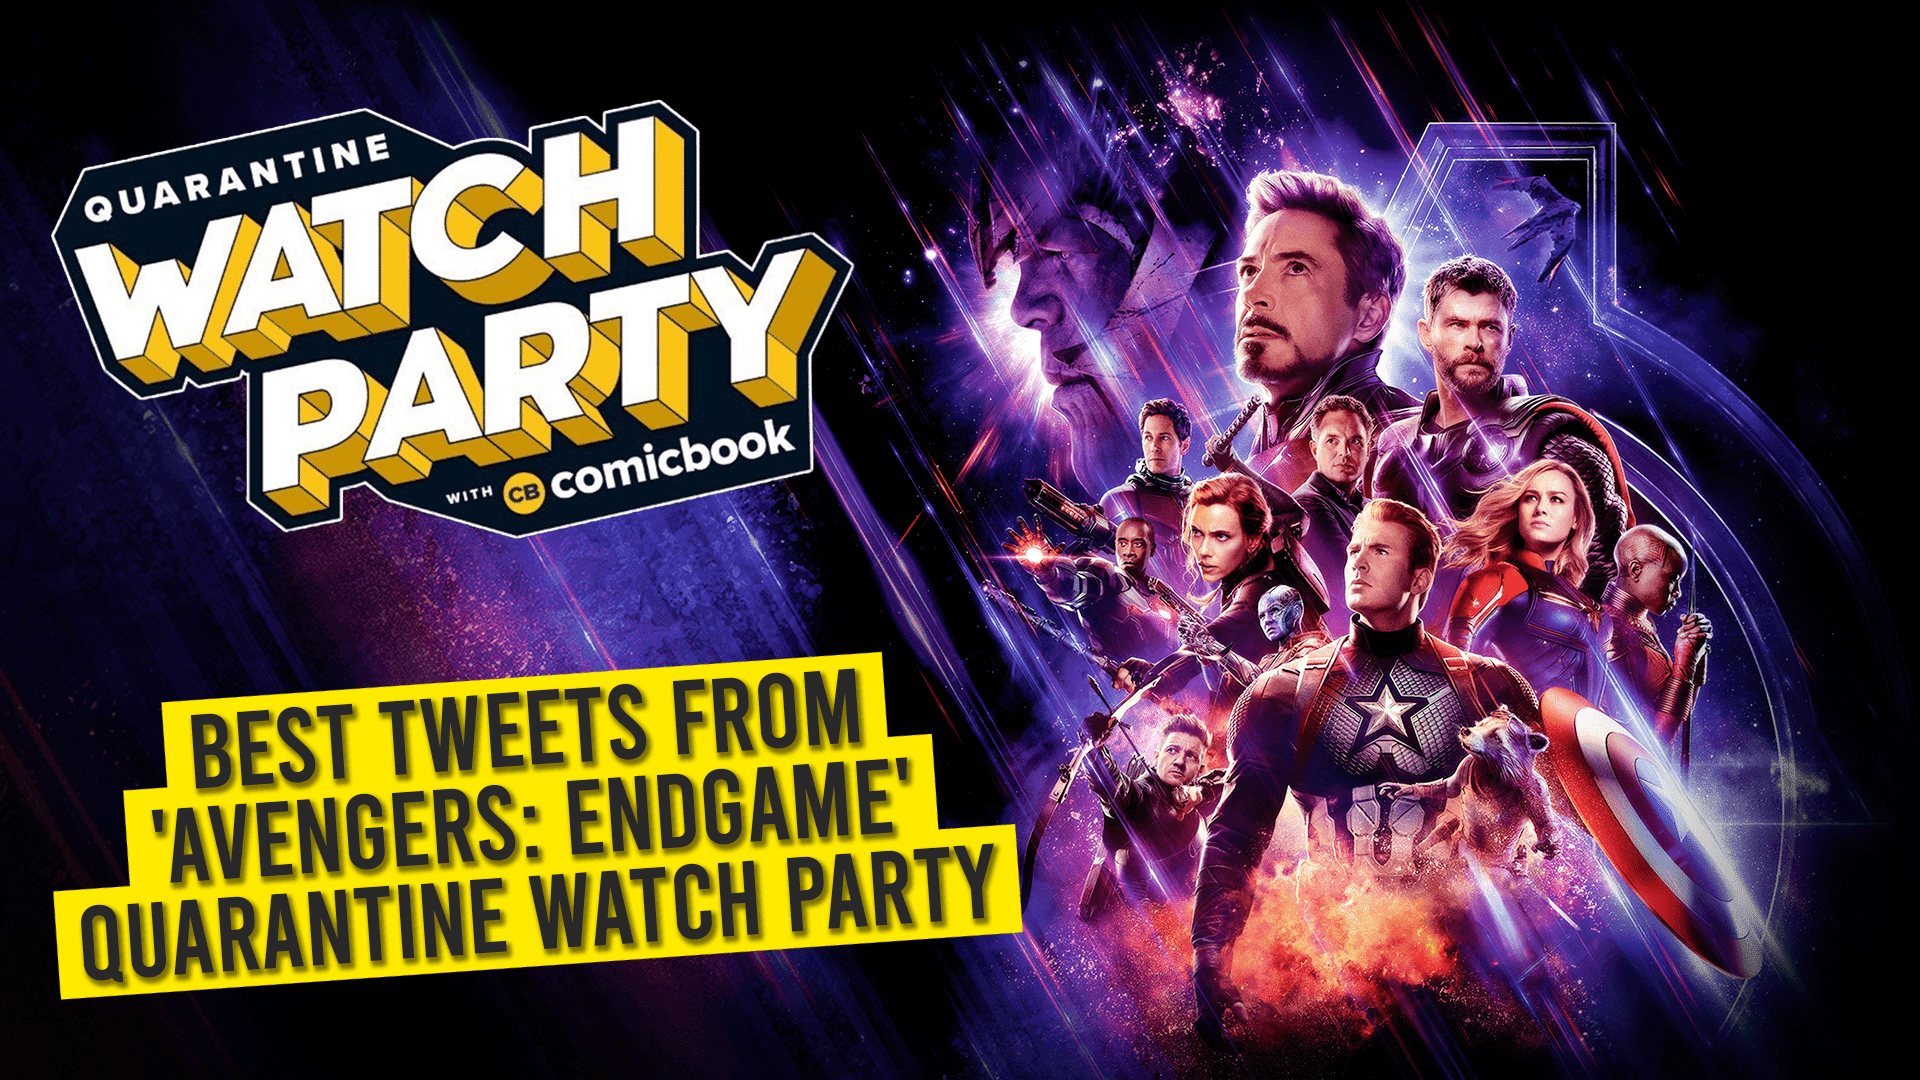 Best Tweets From ‘Avengers: Endgame’ Quarantine Watch Party